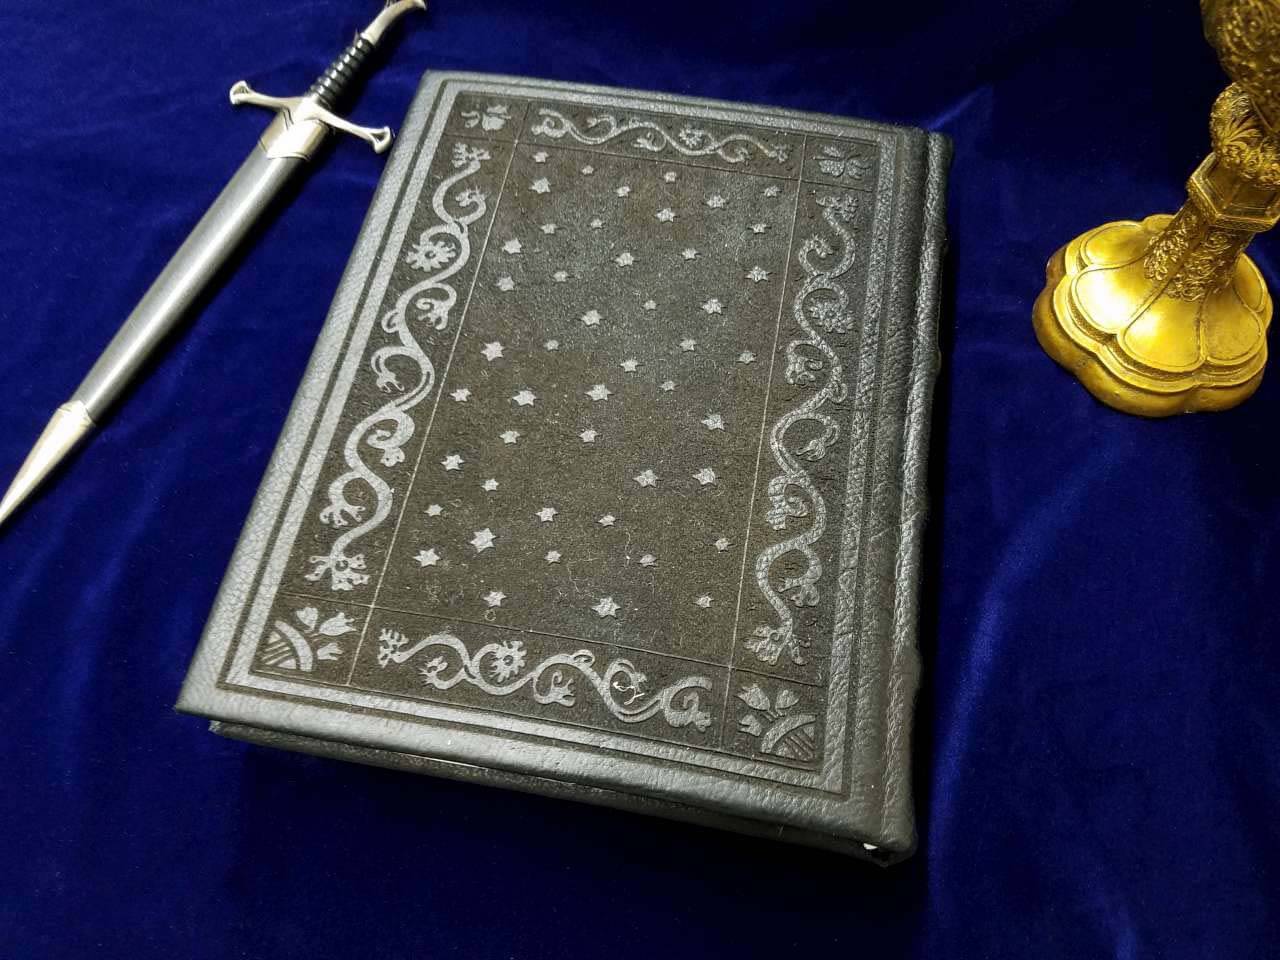 Legends of the Long Night - Book Replica Game of Thrones Inspired